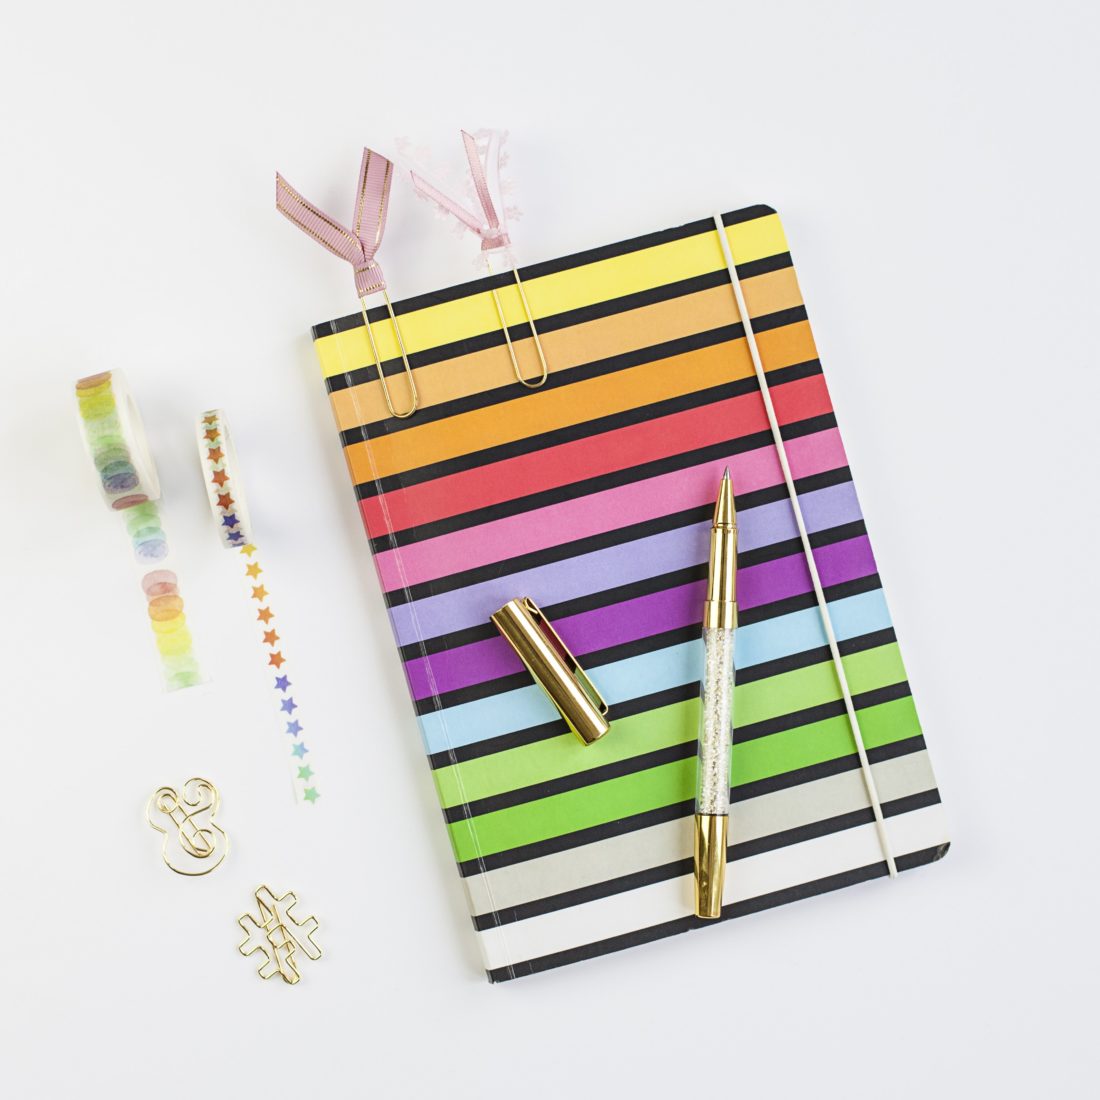 Free stock image of Paper Notebook Flat lay